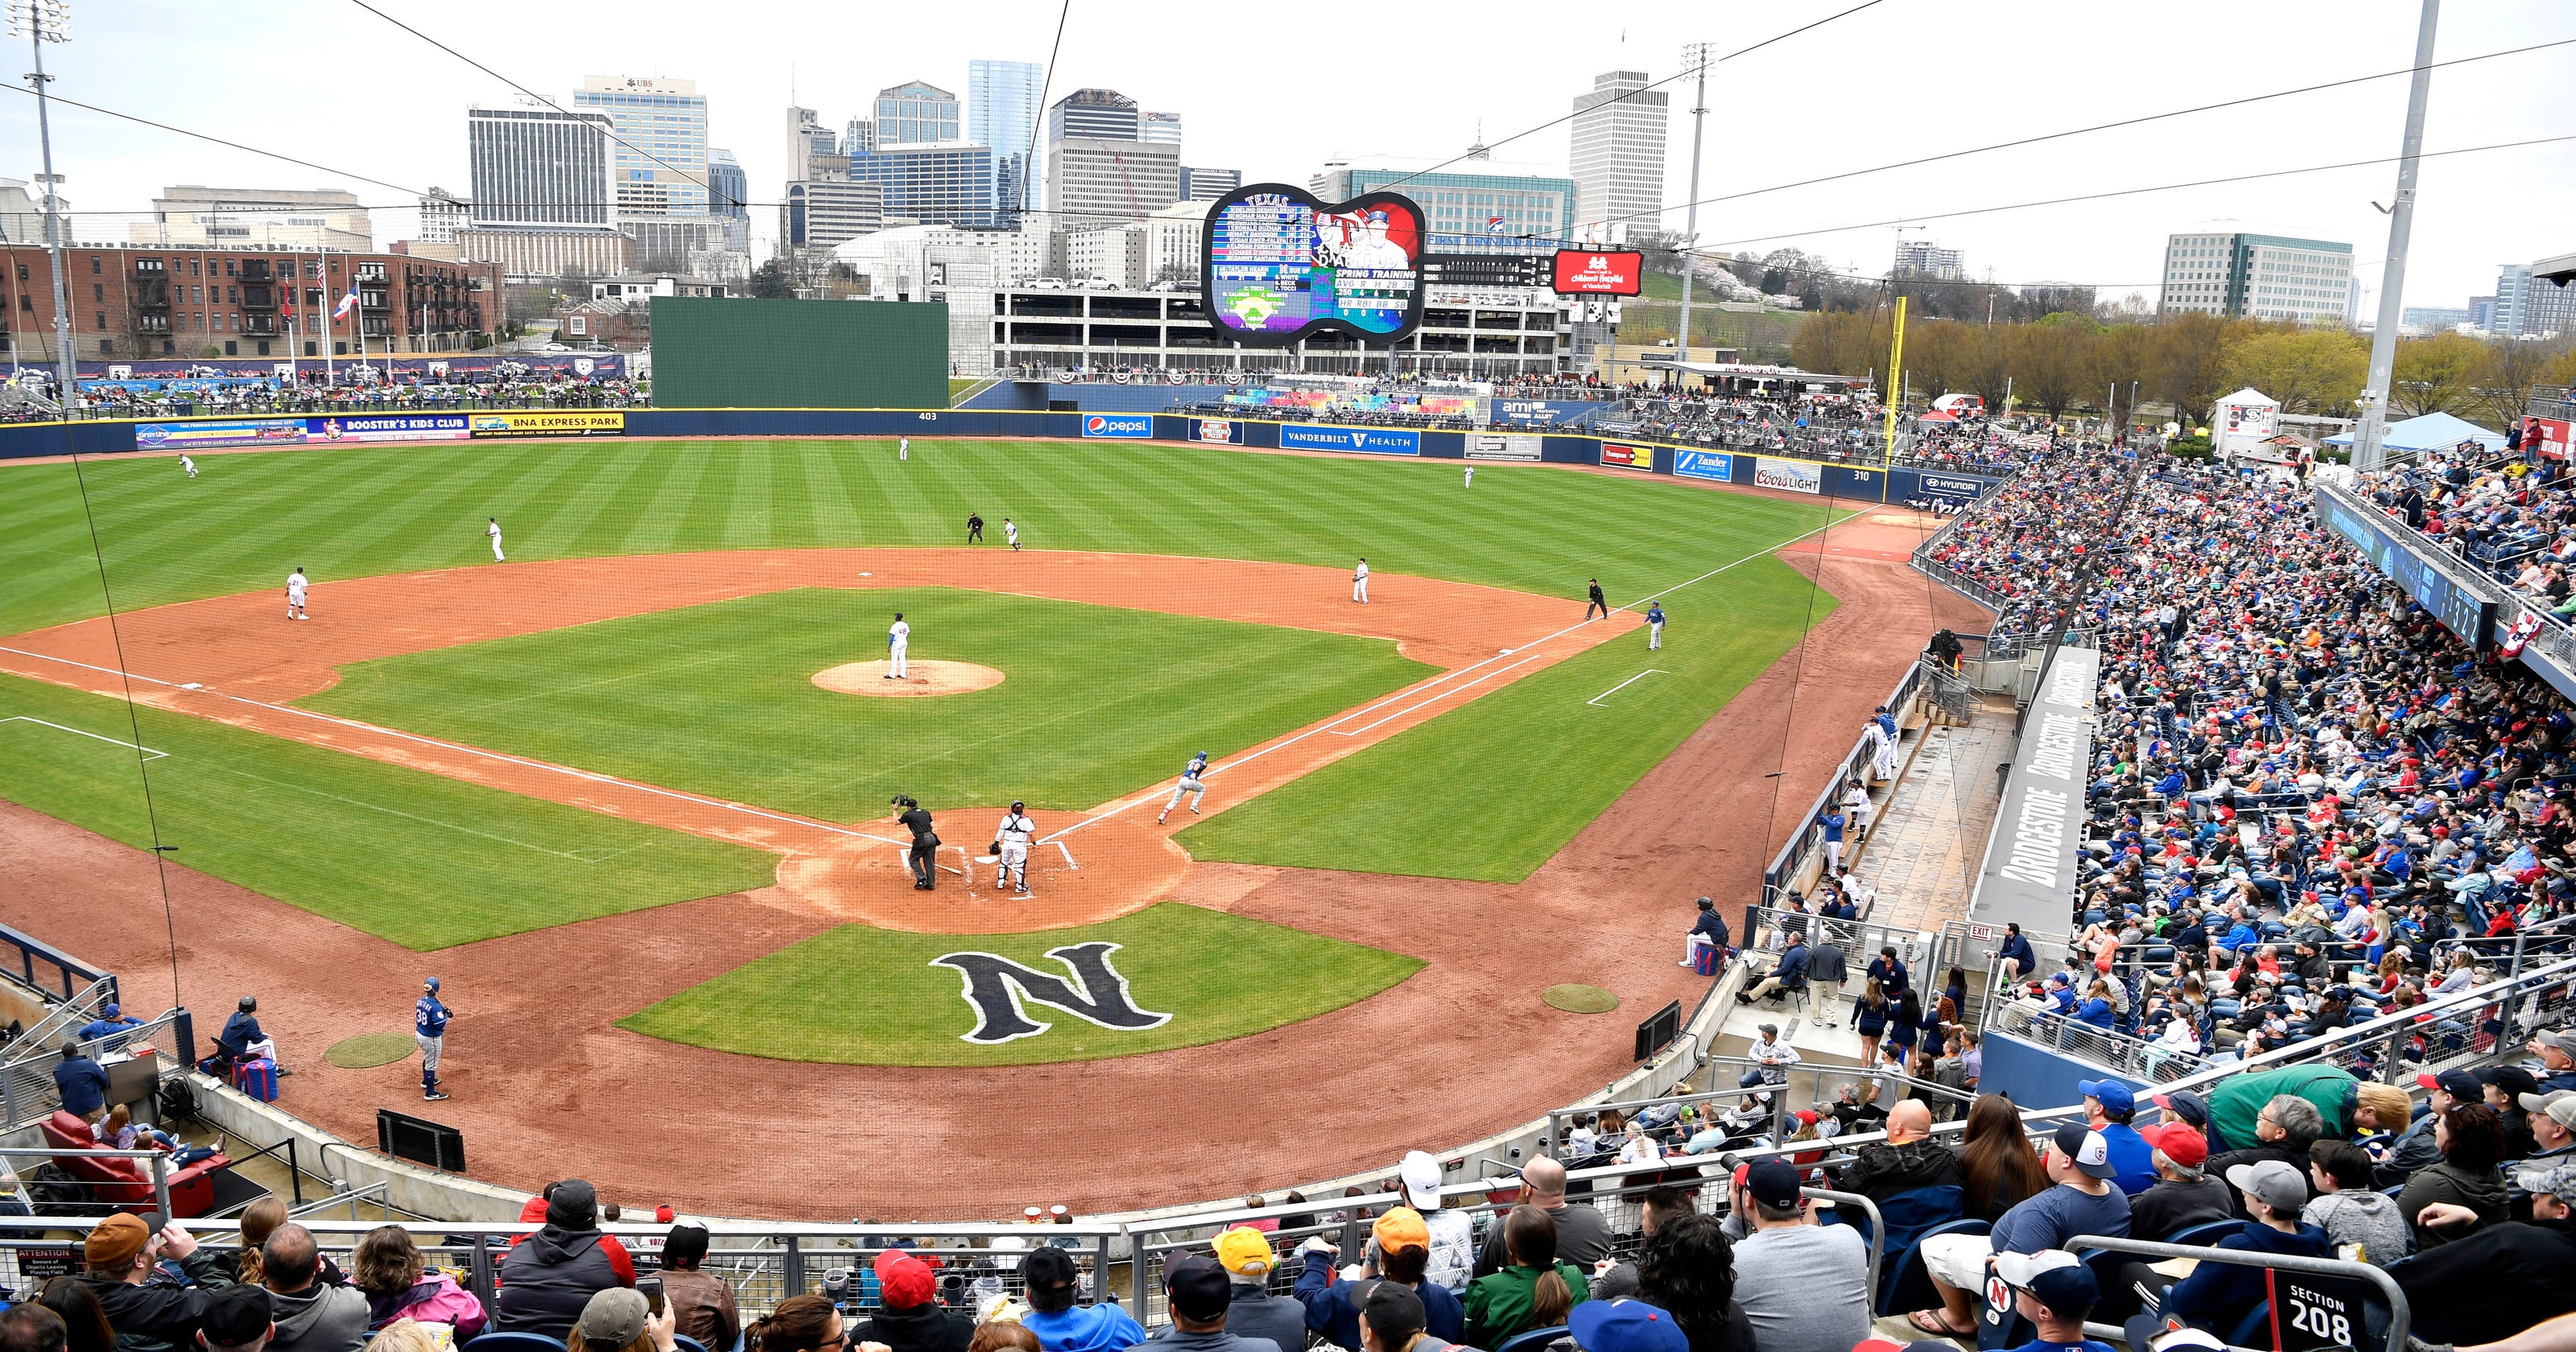 Bargain baseball: Nashville Sounds offer cheap tickets and fun promotions in 2019